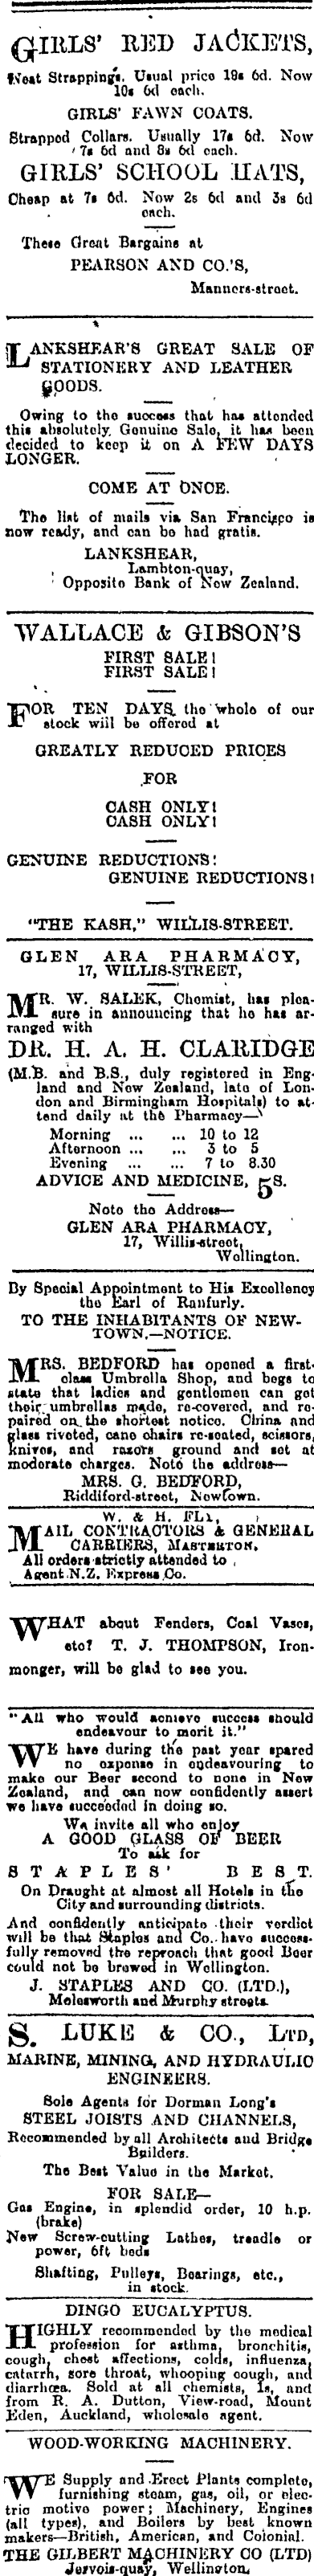 Papers Past Newspapers Evening Post 23 June 1903 Page 1 Advertisements Column 1